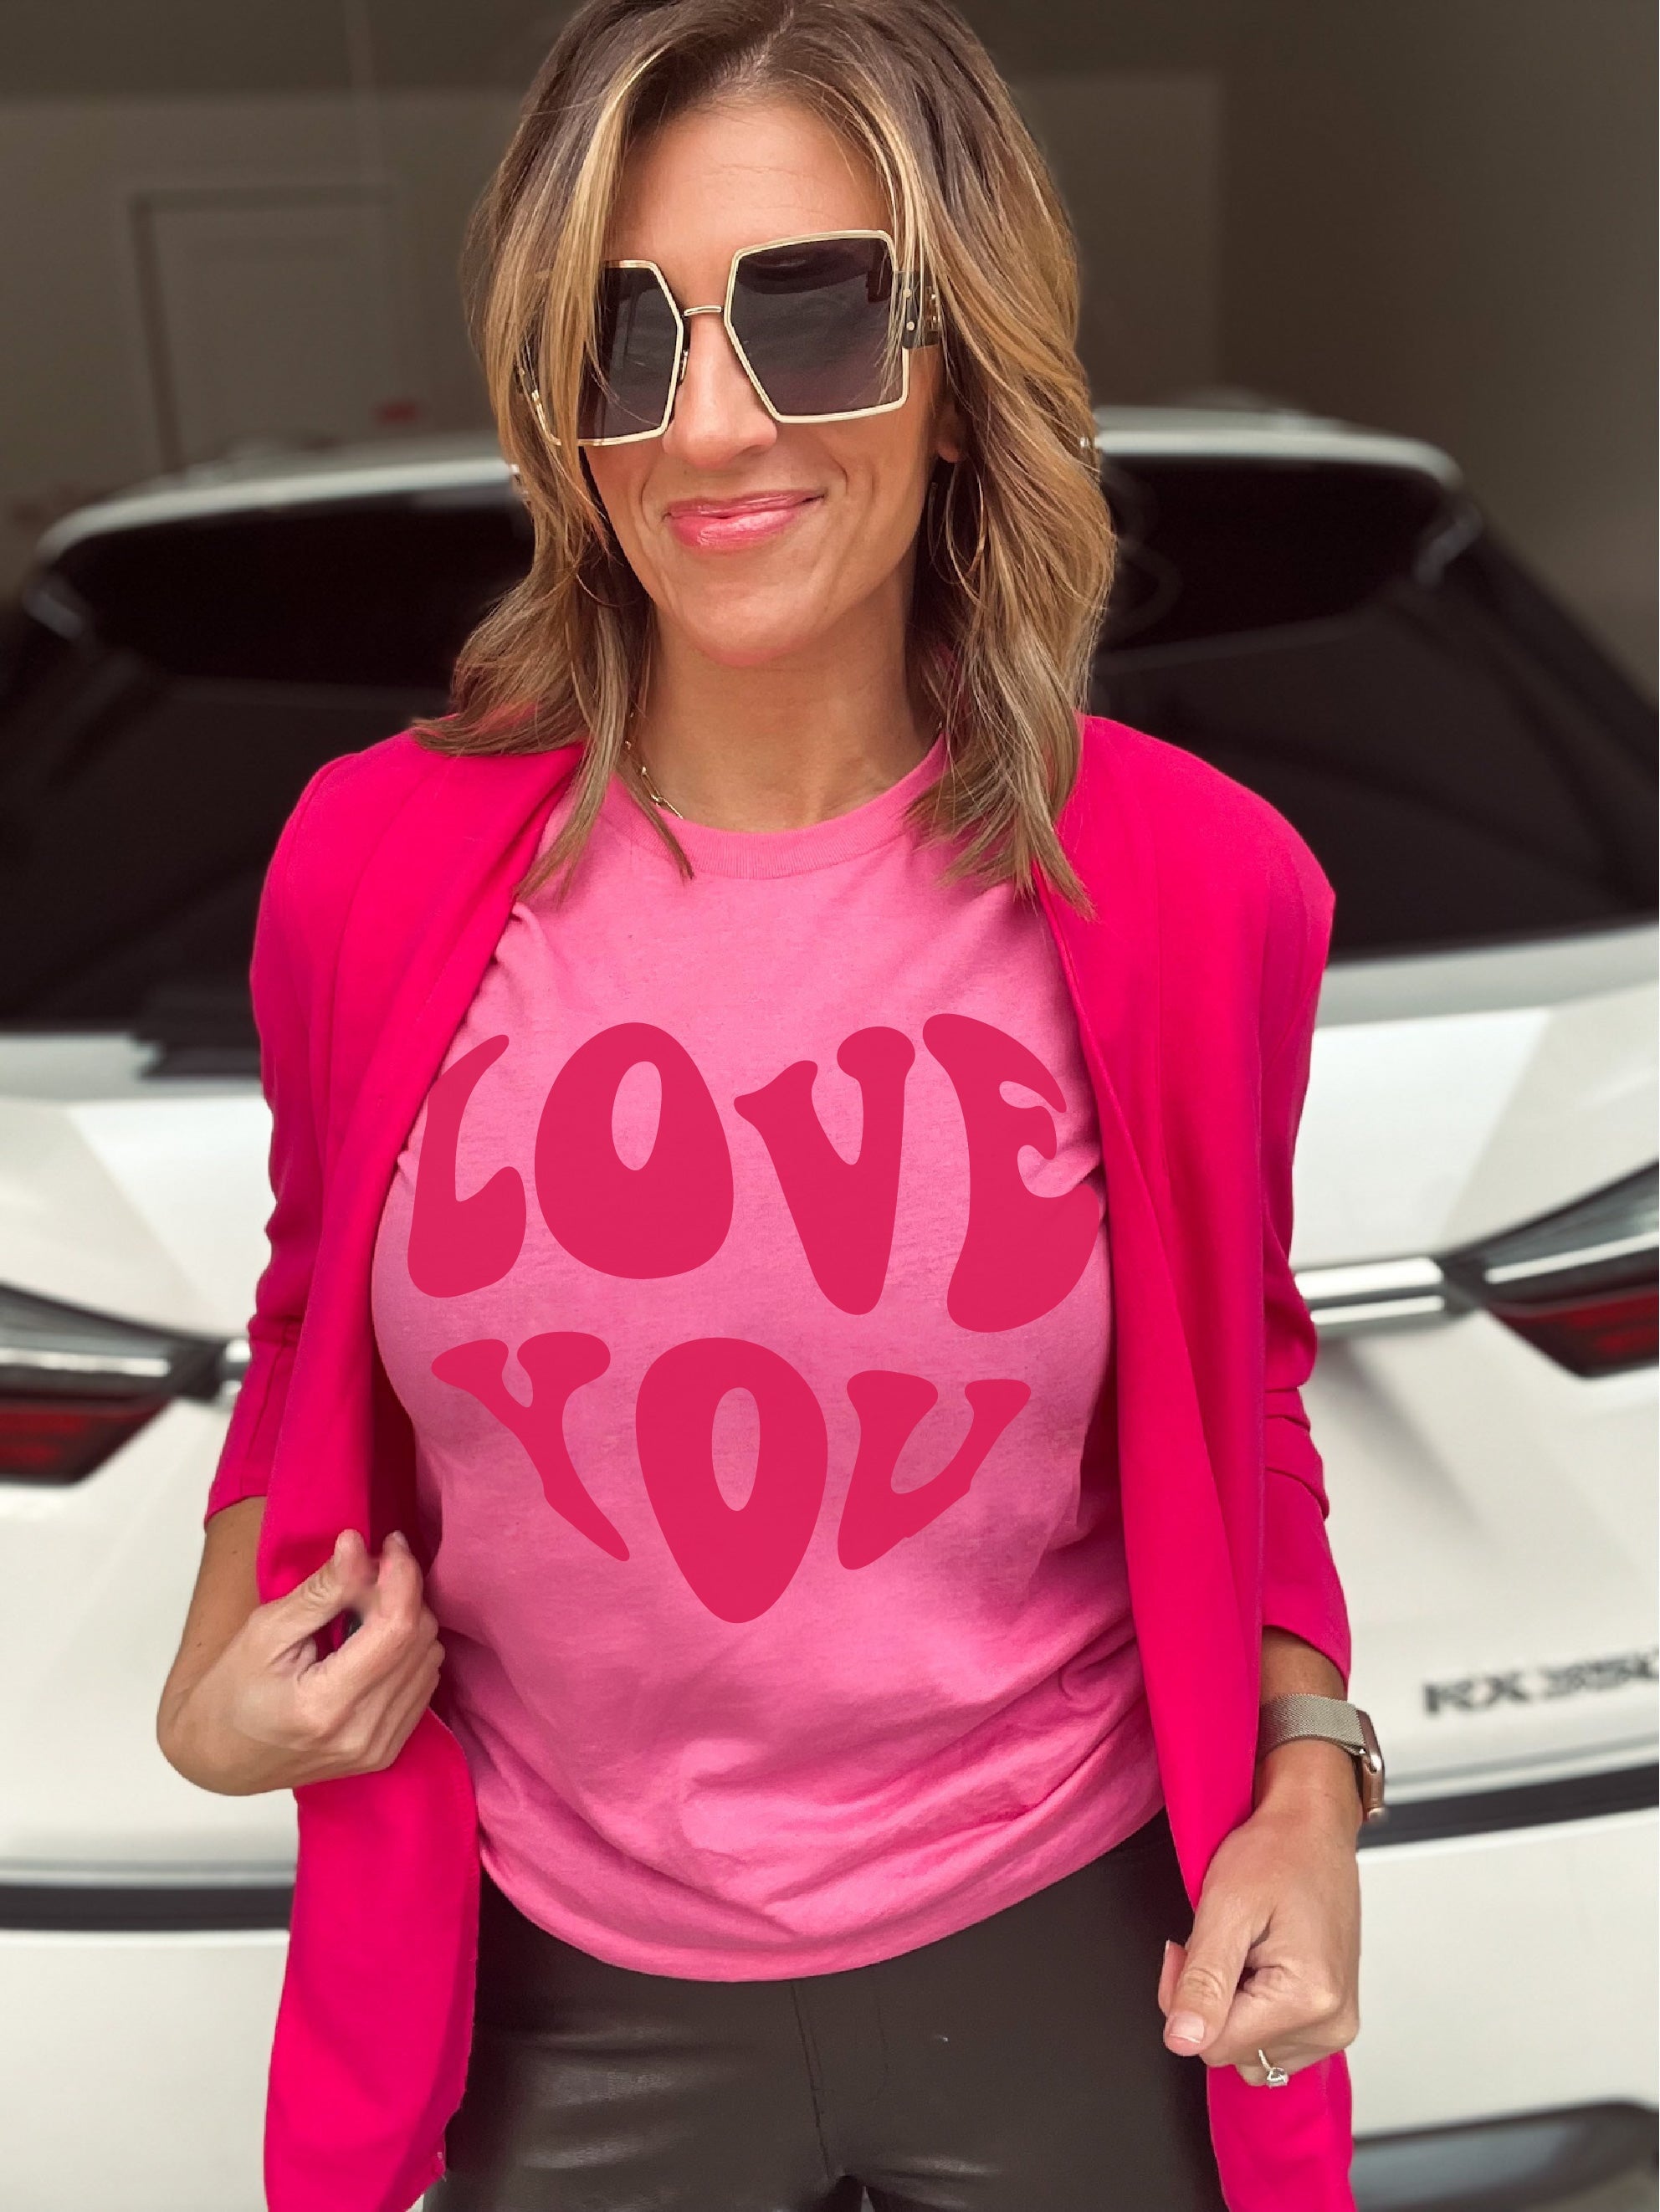 Love you tee Short sleeve valentines day tee Bella Canvas 3001 charity pink 